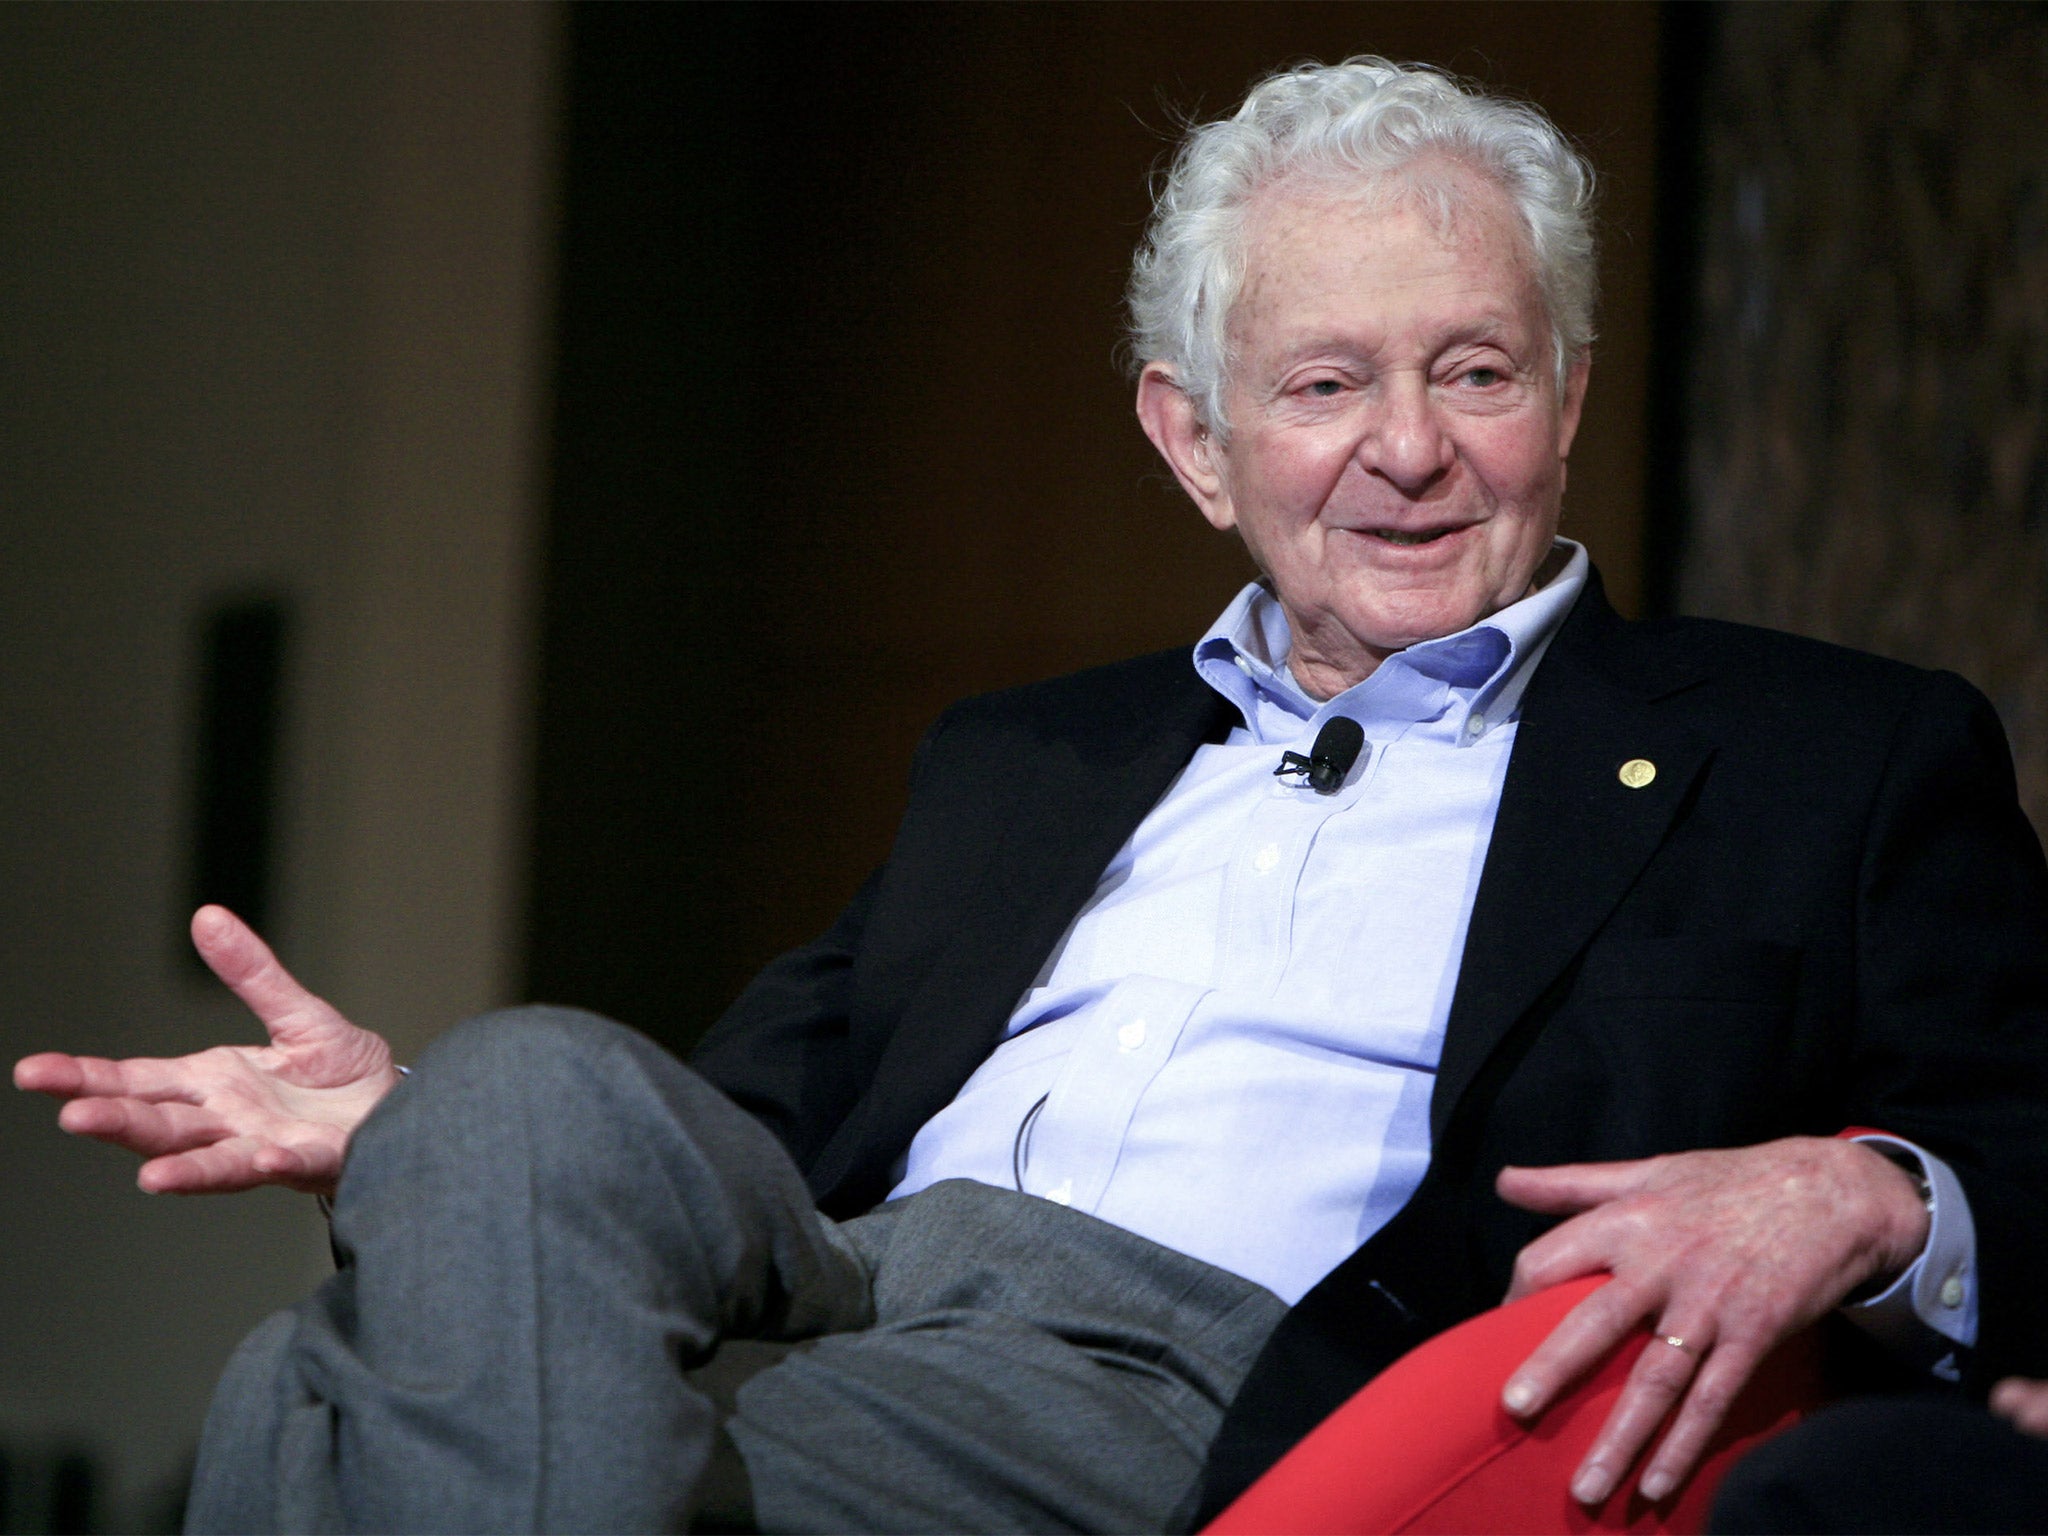 Lederman, 92, was one of the leading particle physicists of the 20th century